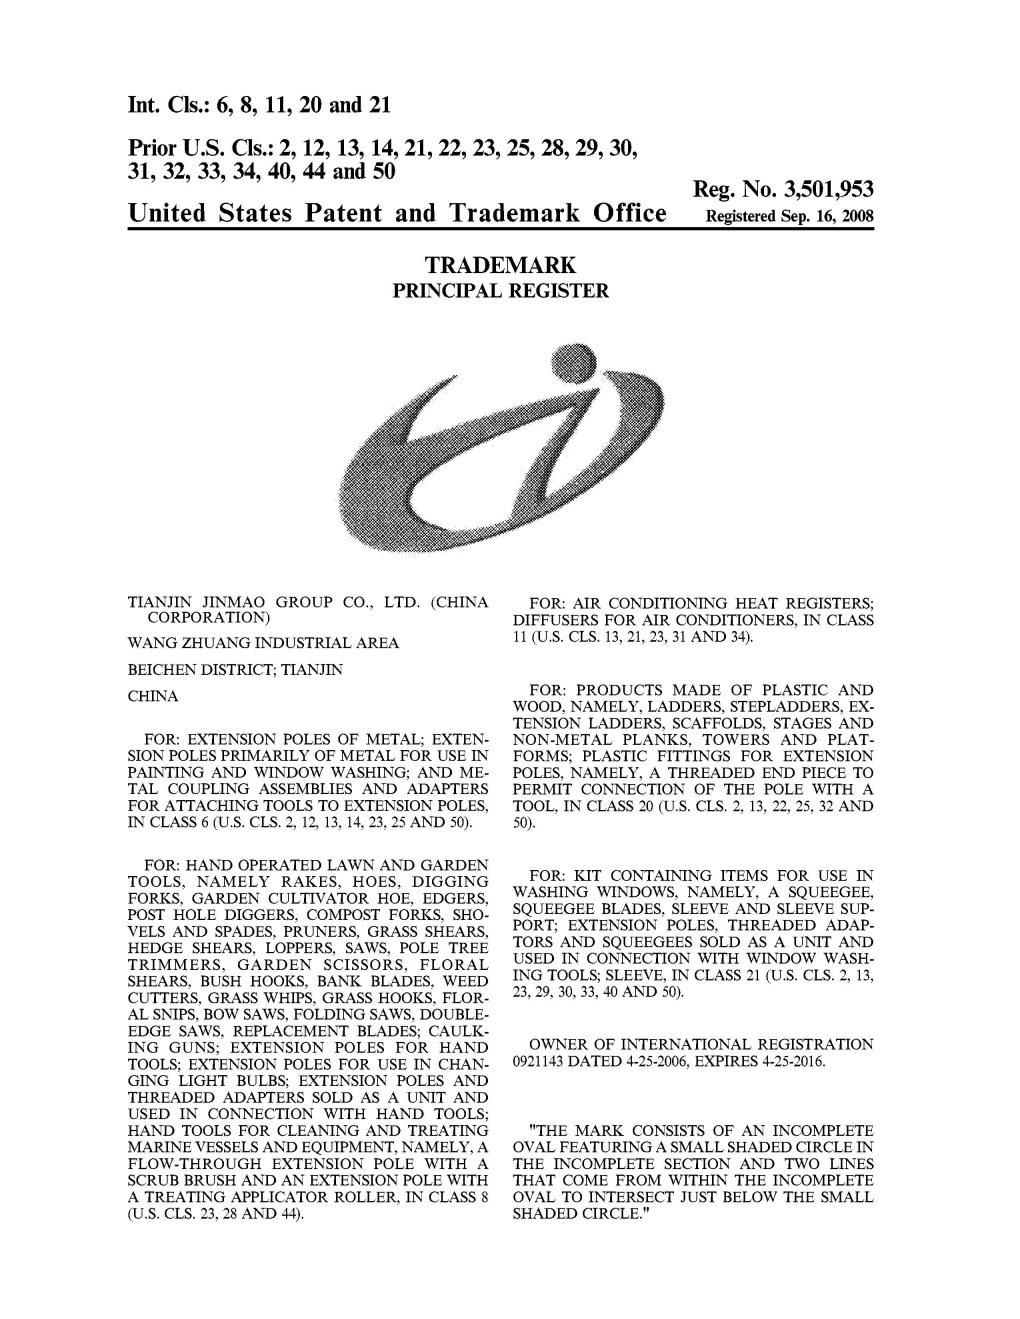 United States Patent and Trademark Office Registered Sep